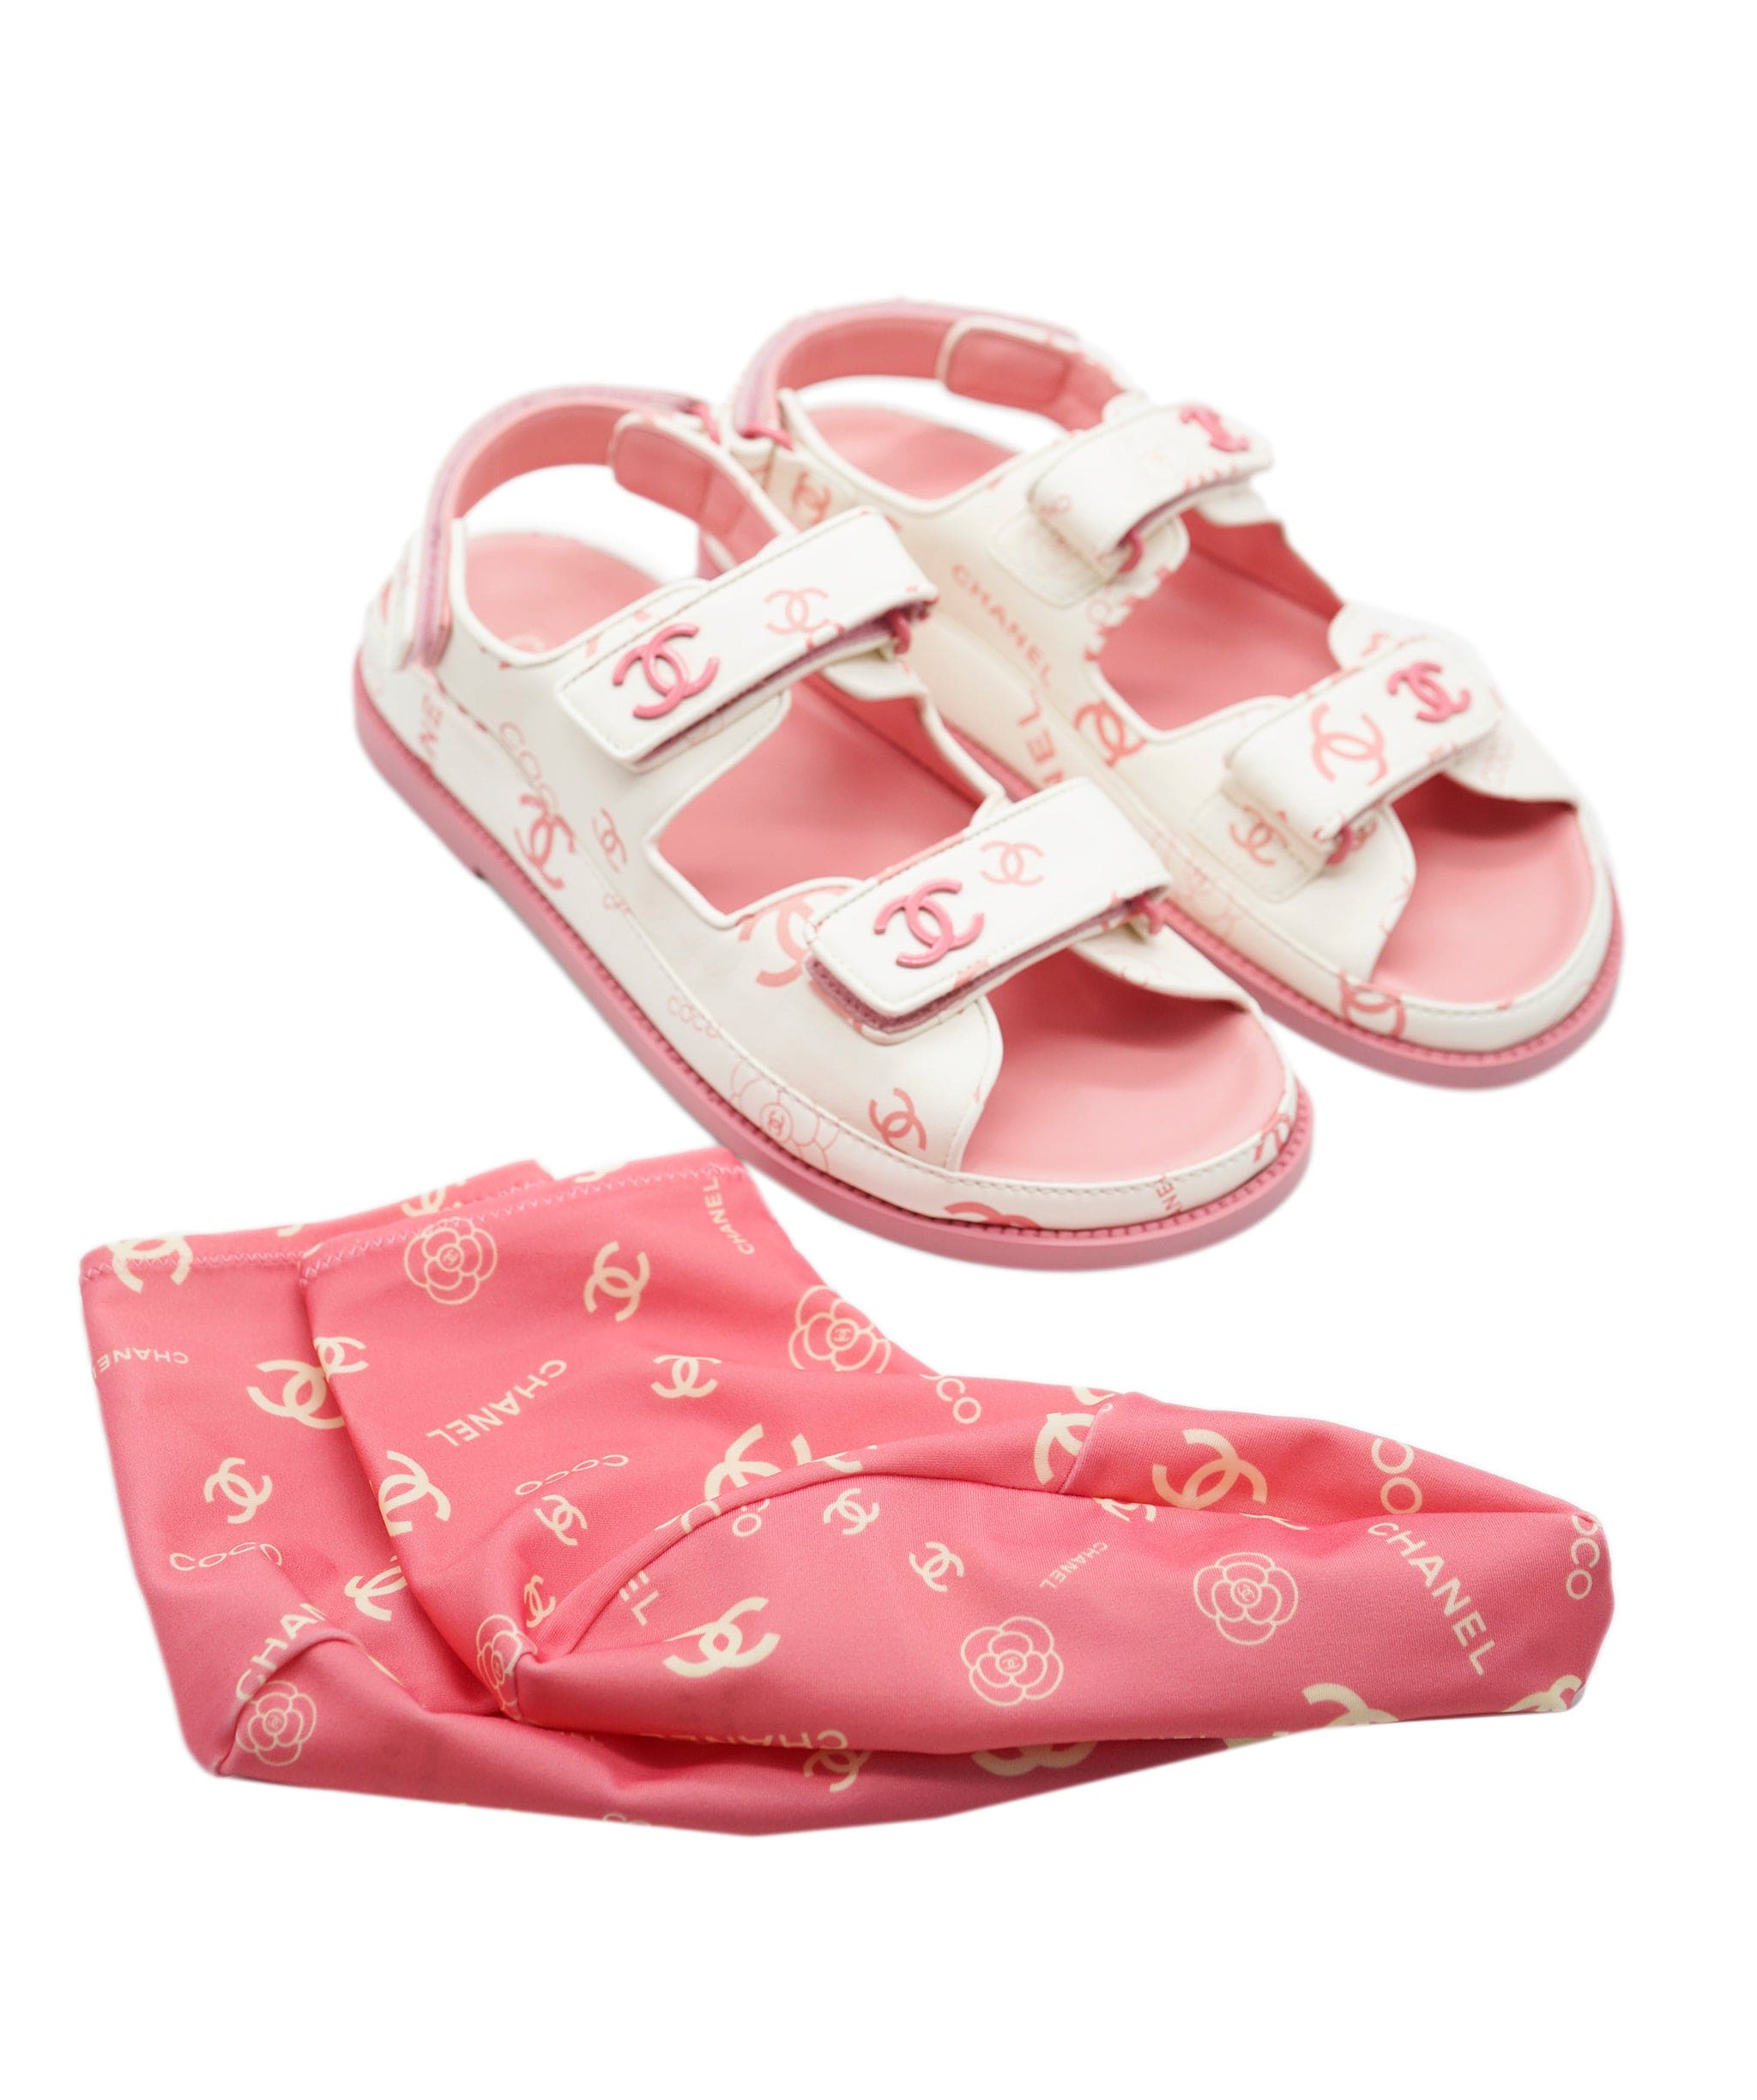 Dad sandals cloth sandal Chanel Pink size 39 EU in Cloth - 39008889